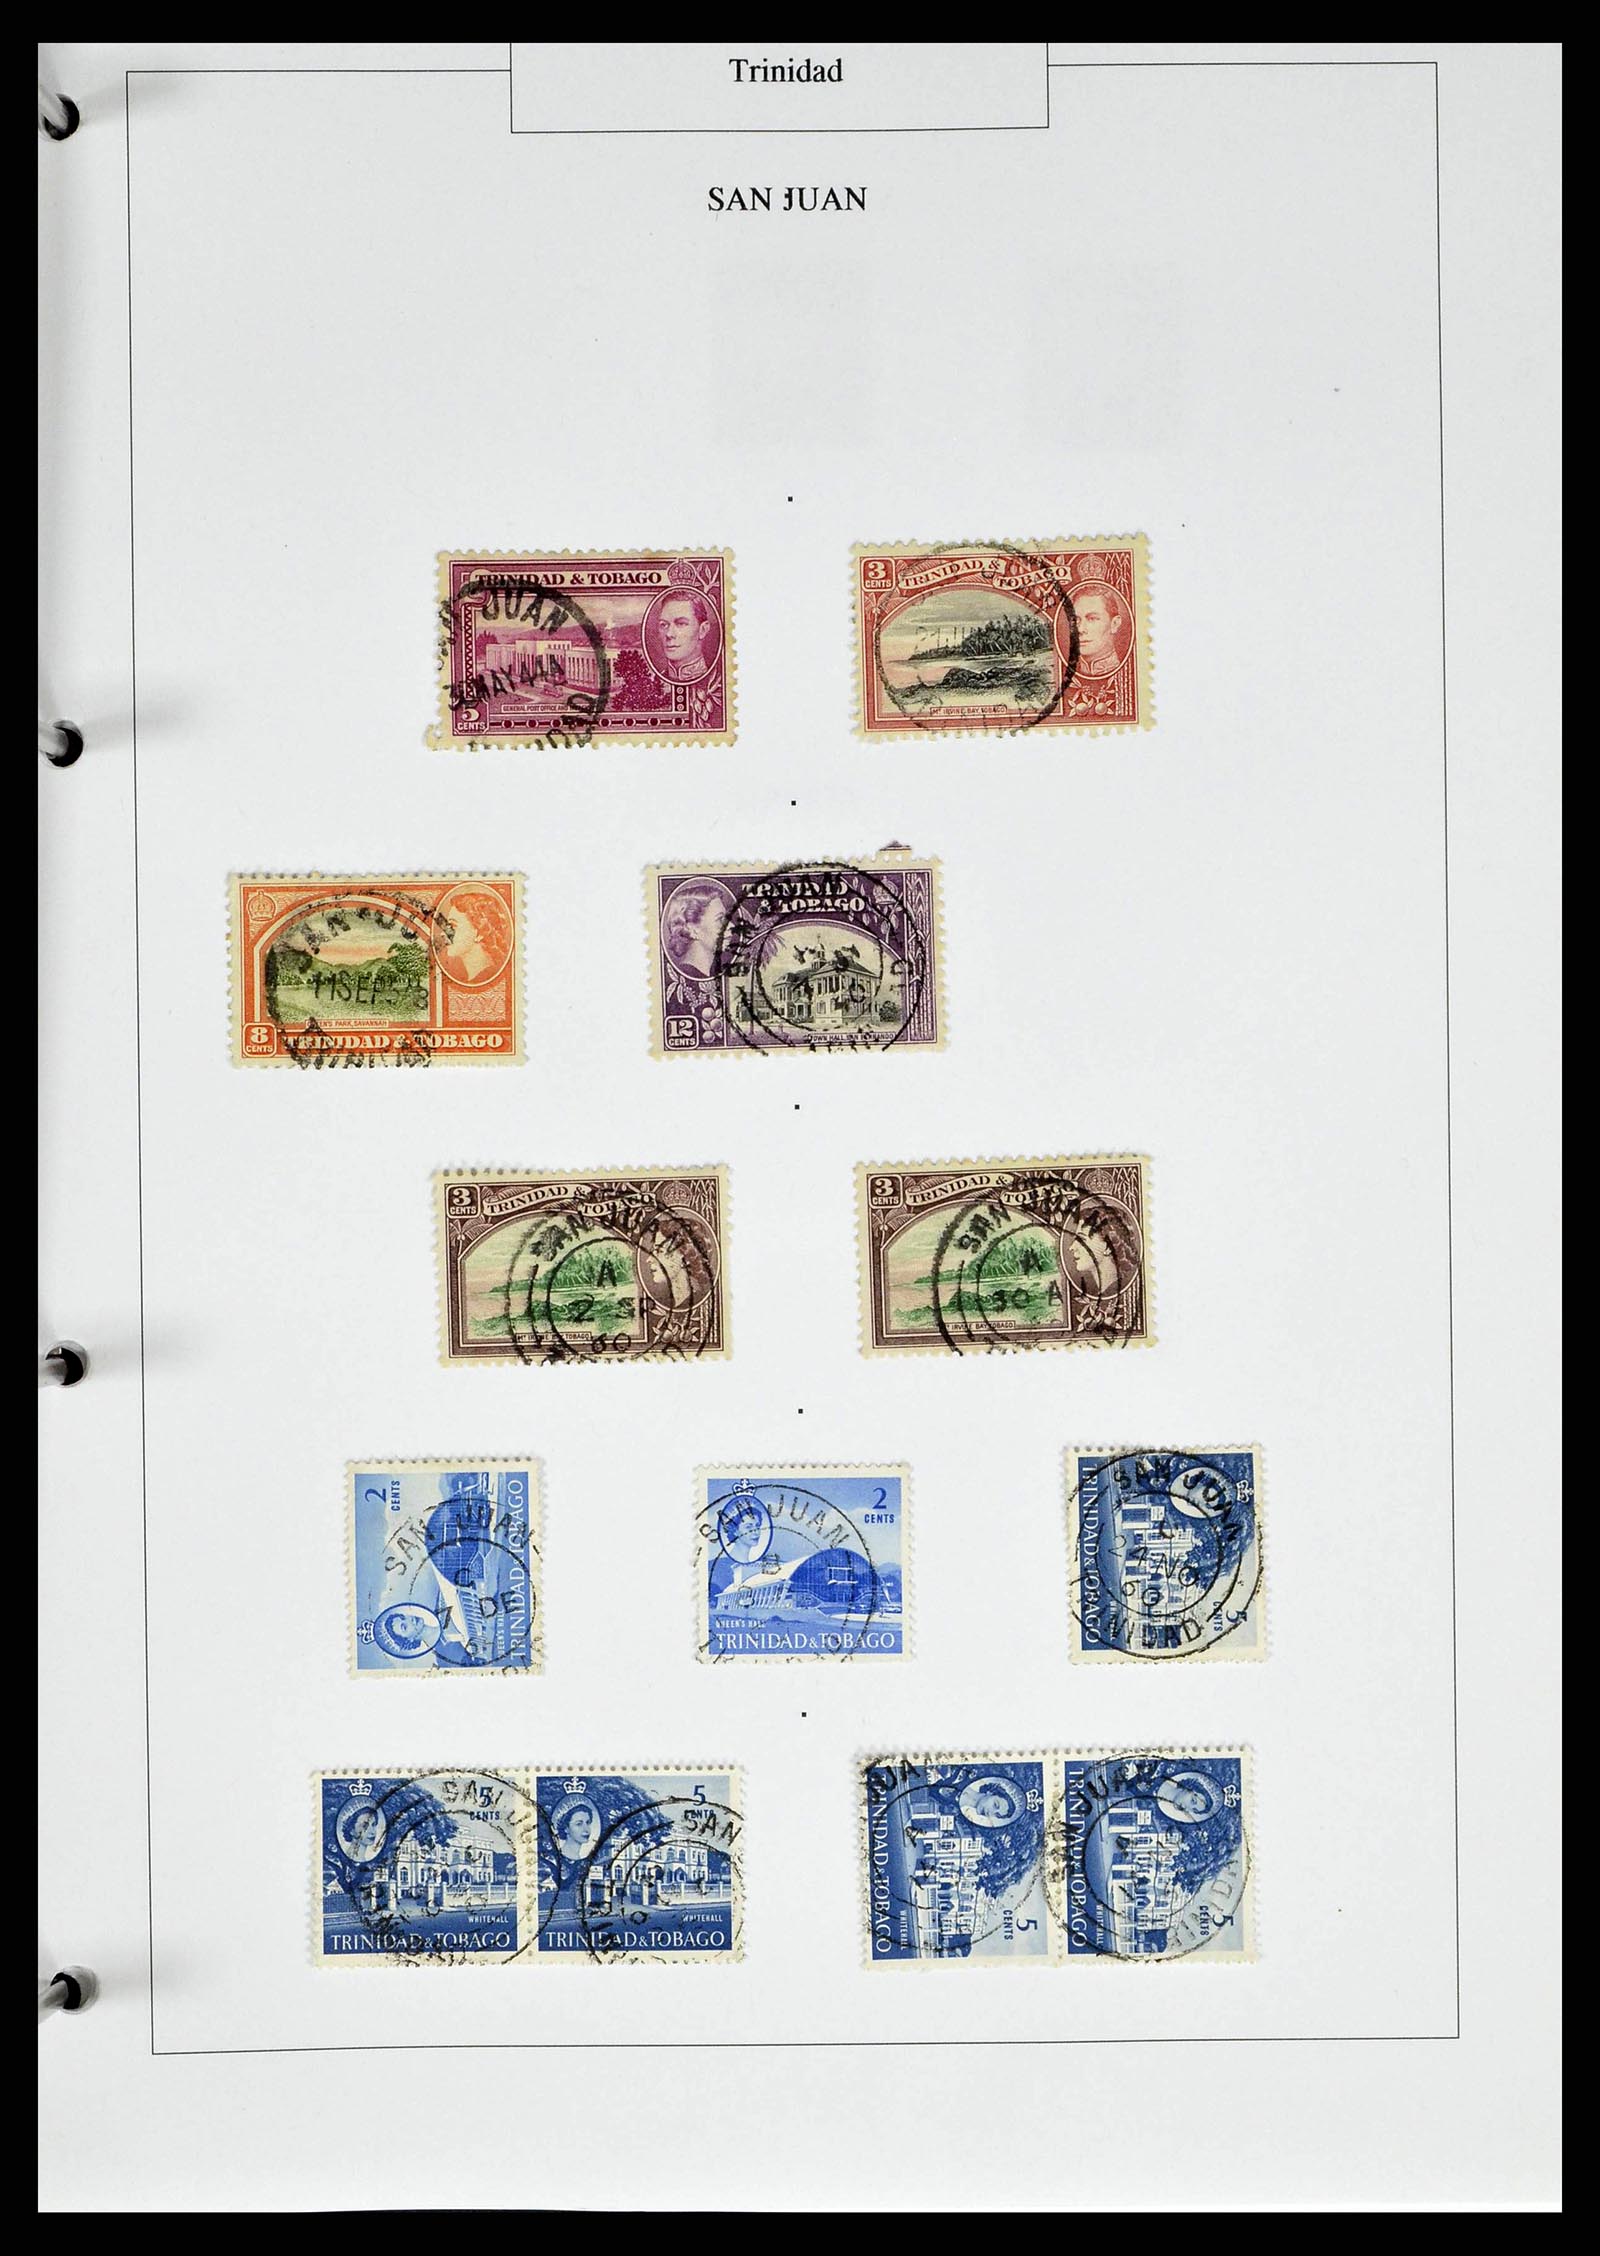 38481 0049 - Stamp collection 38481 Trinidad and Tobago cancels 1859-1960.